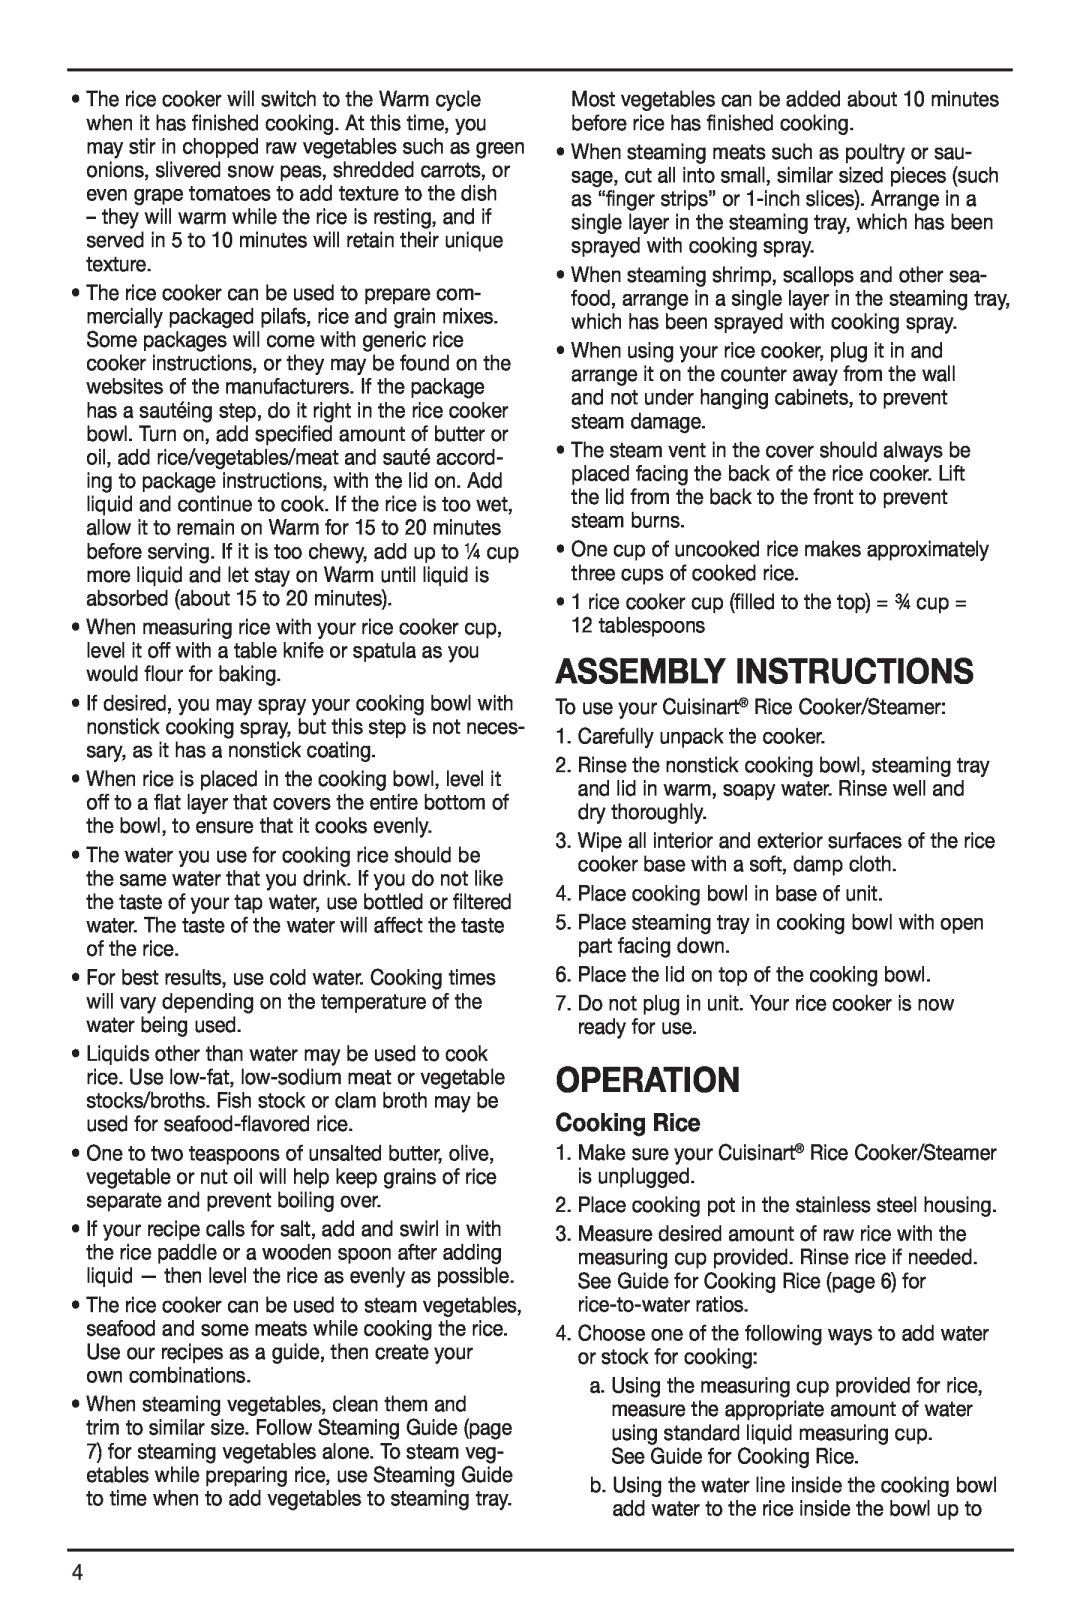 Cuisinart IB-4932B manual Assembly Instructions, Operation, Cooking Rice 